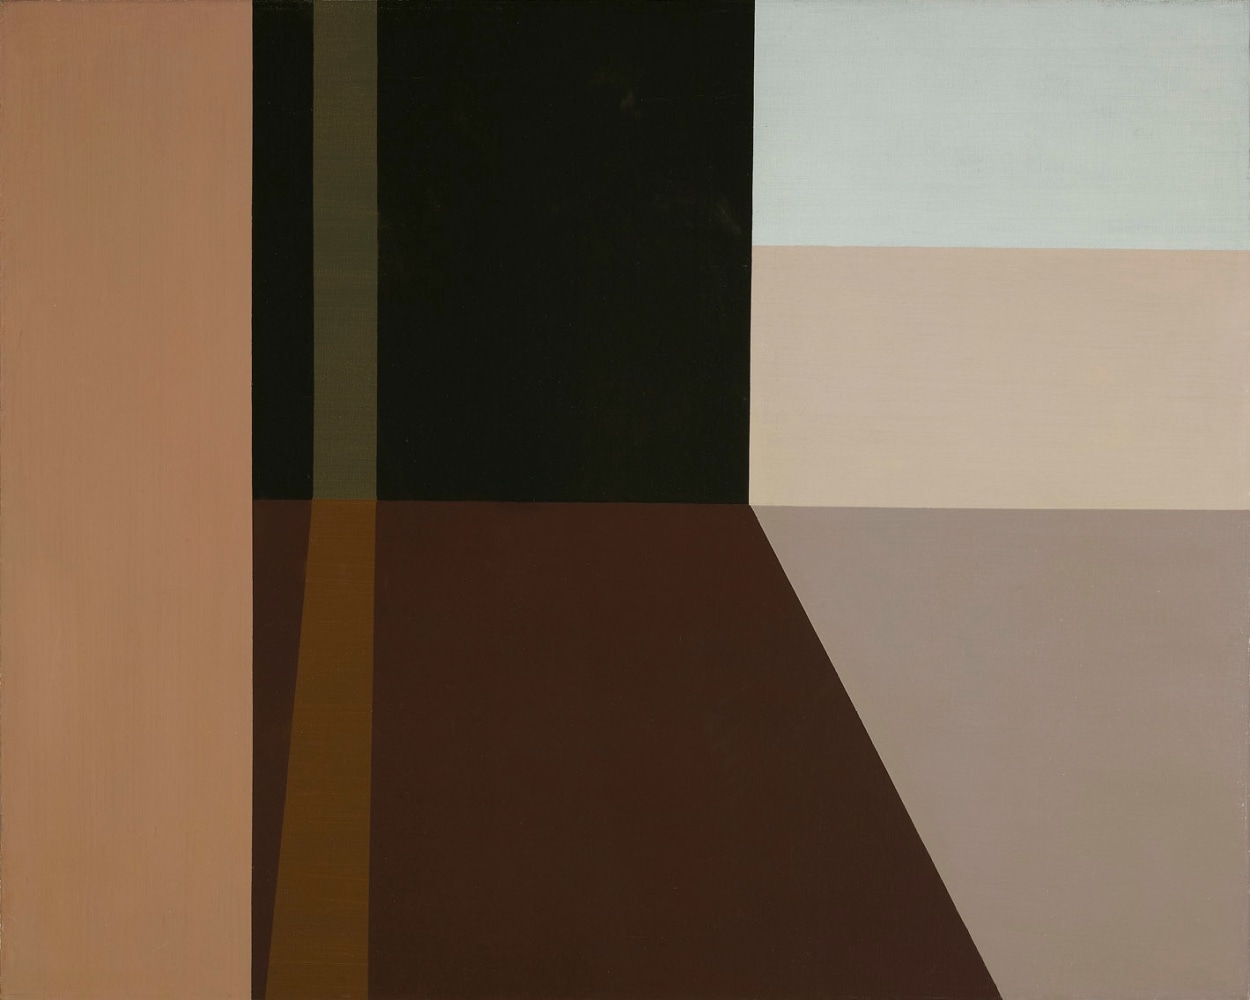 Interior with Light Paths,&amp;nbsp;1962

Oil on canvas

24 x 30 inches&amp;nbsp;&amp;nbsp;&amp;nbsp;&amp;nbsp;